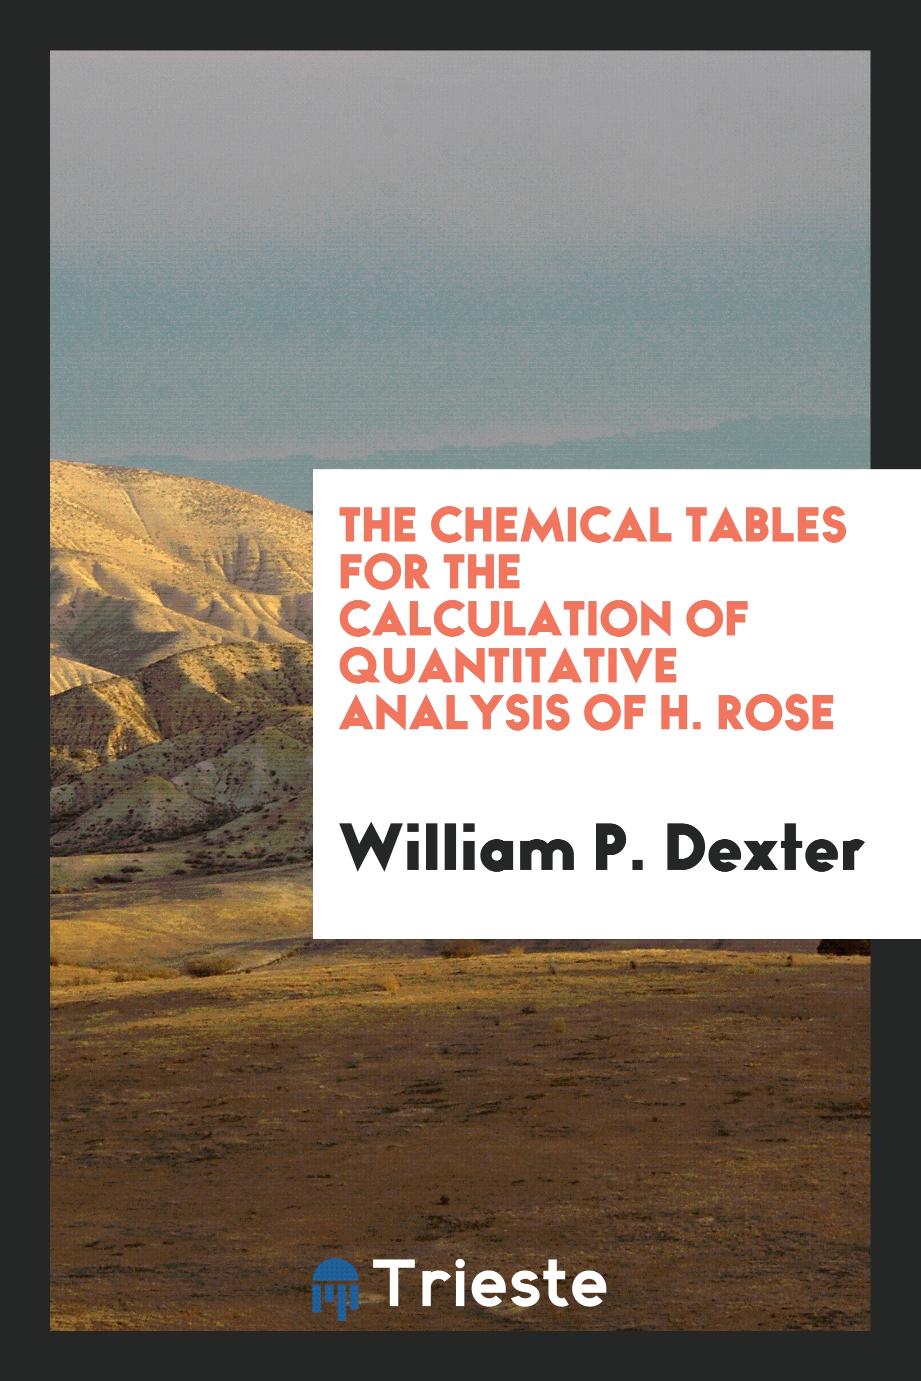 The Chemical Tables for the Calculation of Quantitative Analysis of H. Rose